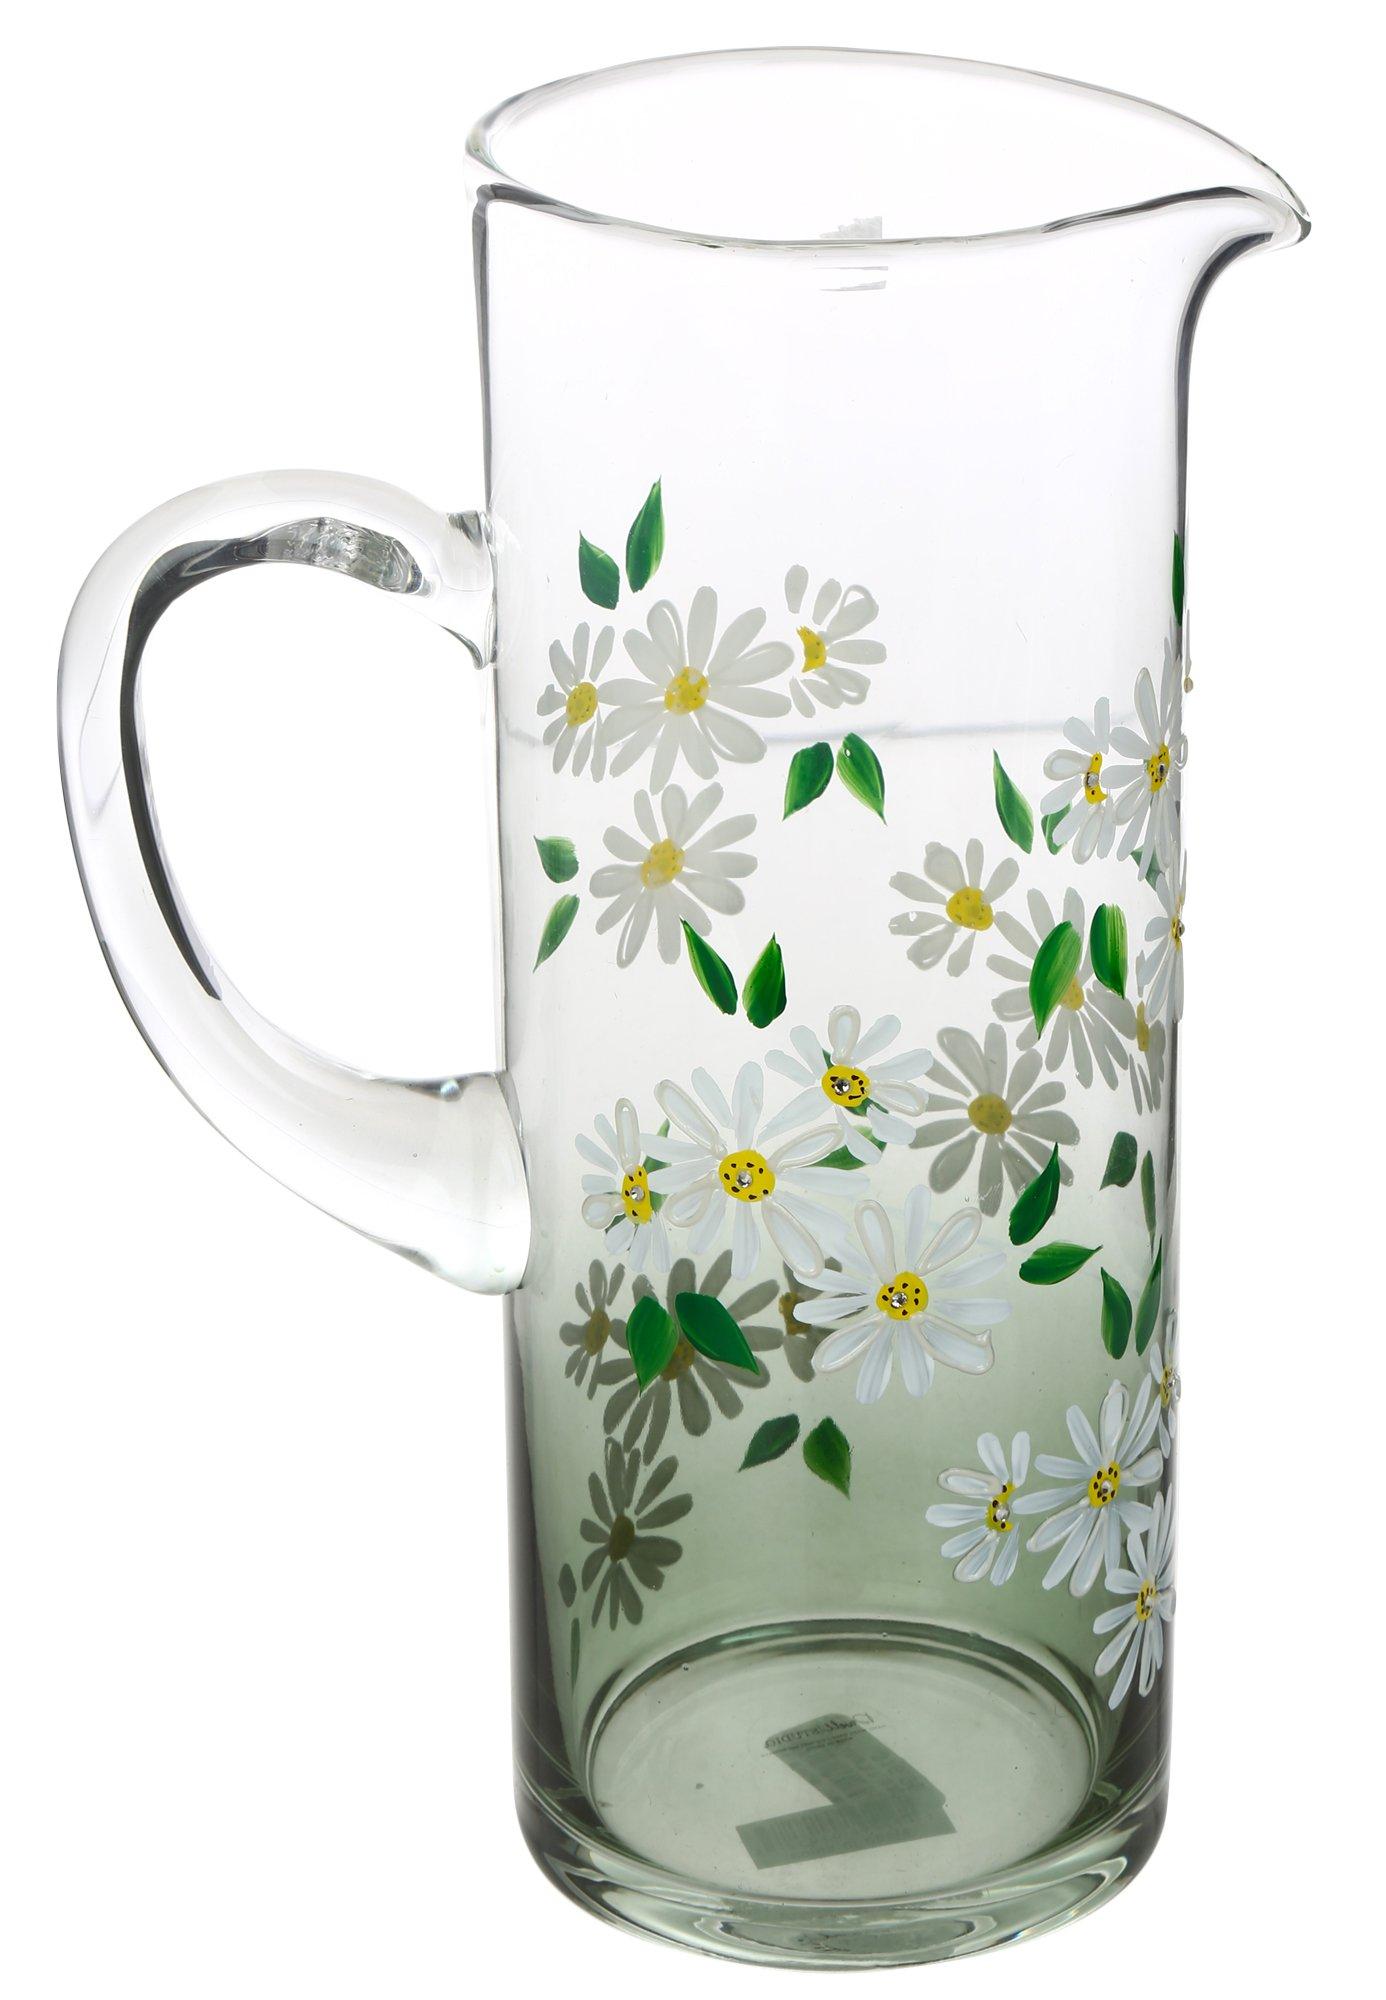 11 in. Daisy Glass Handpainted Drink Pitcher